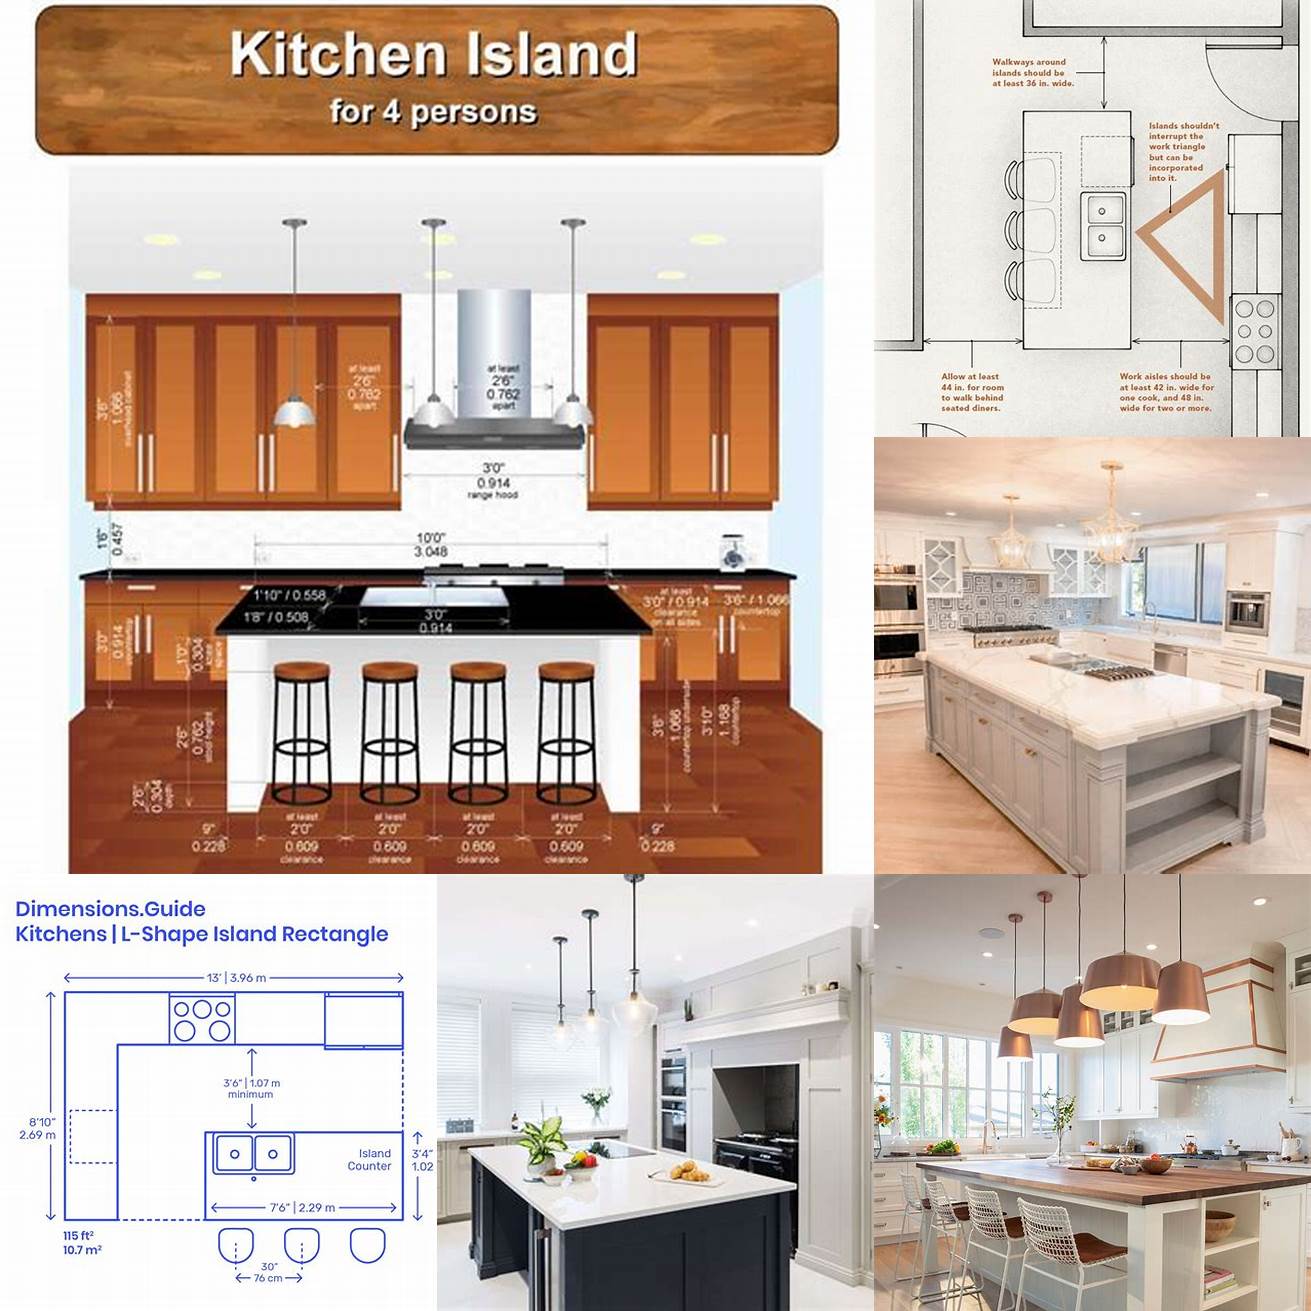 1 Consider the size of your kitchen island